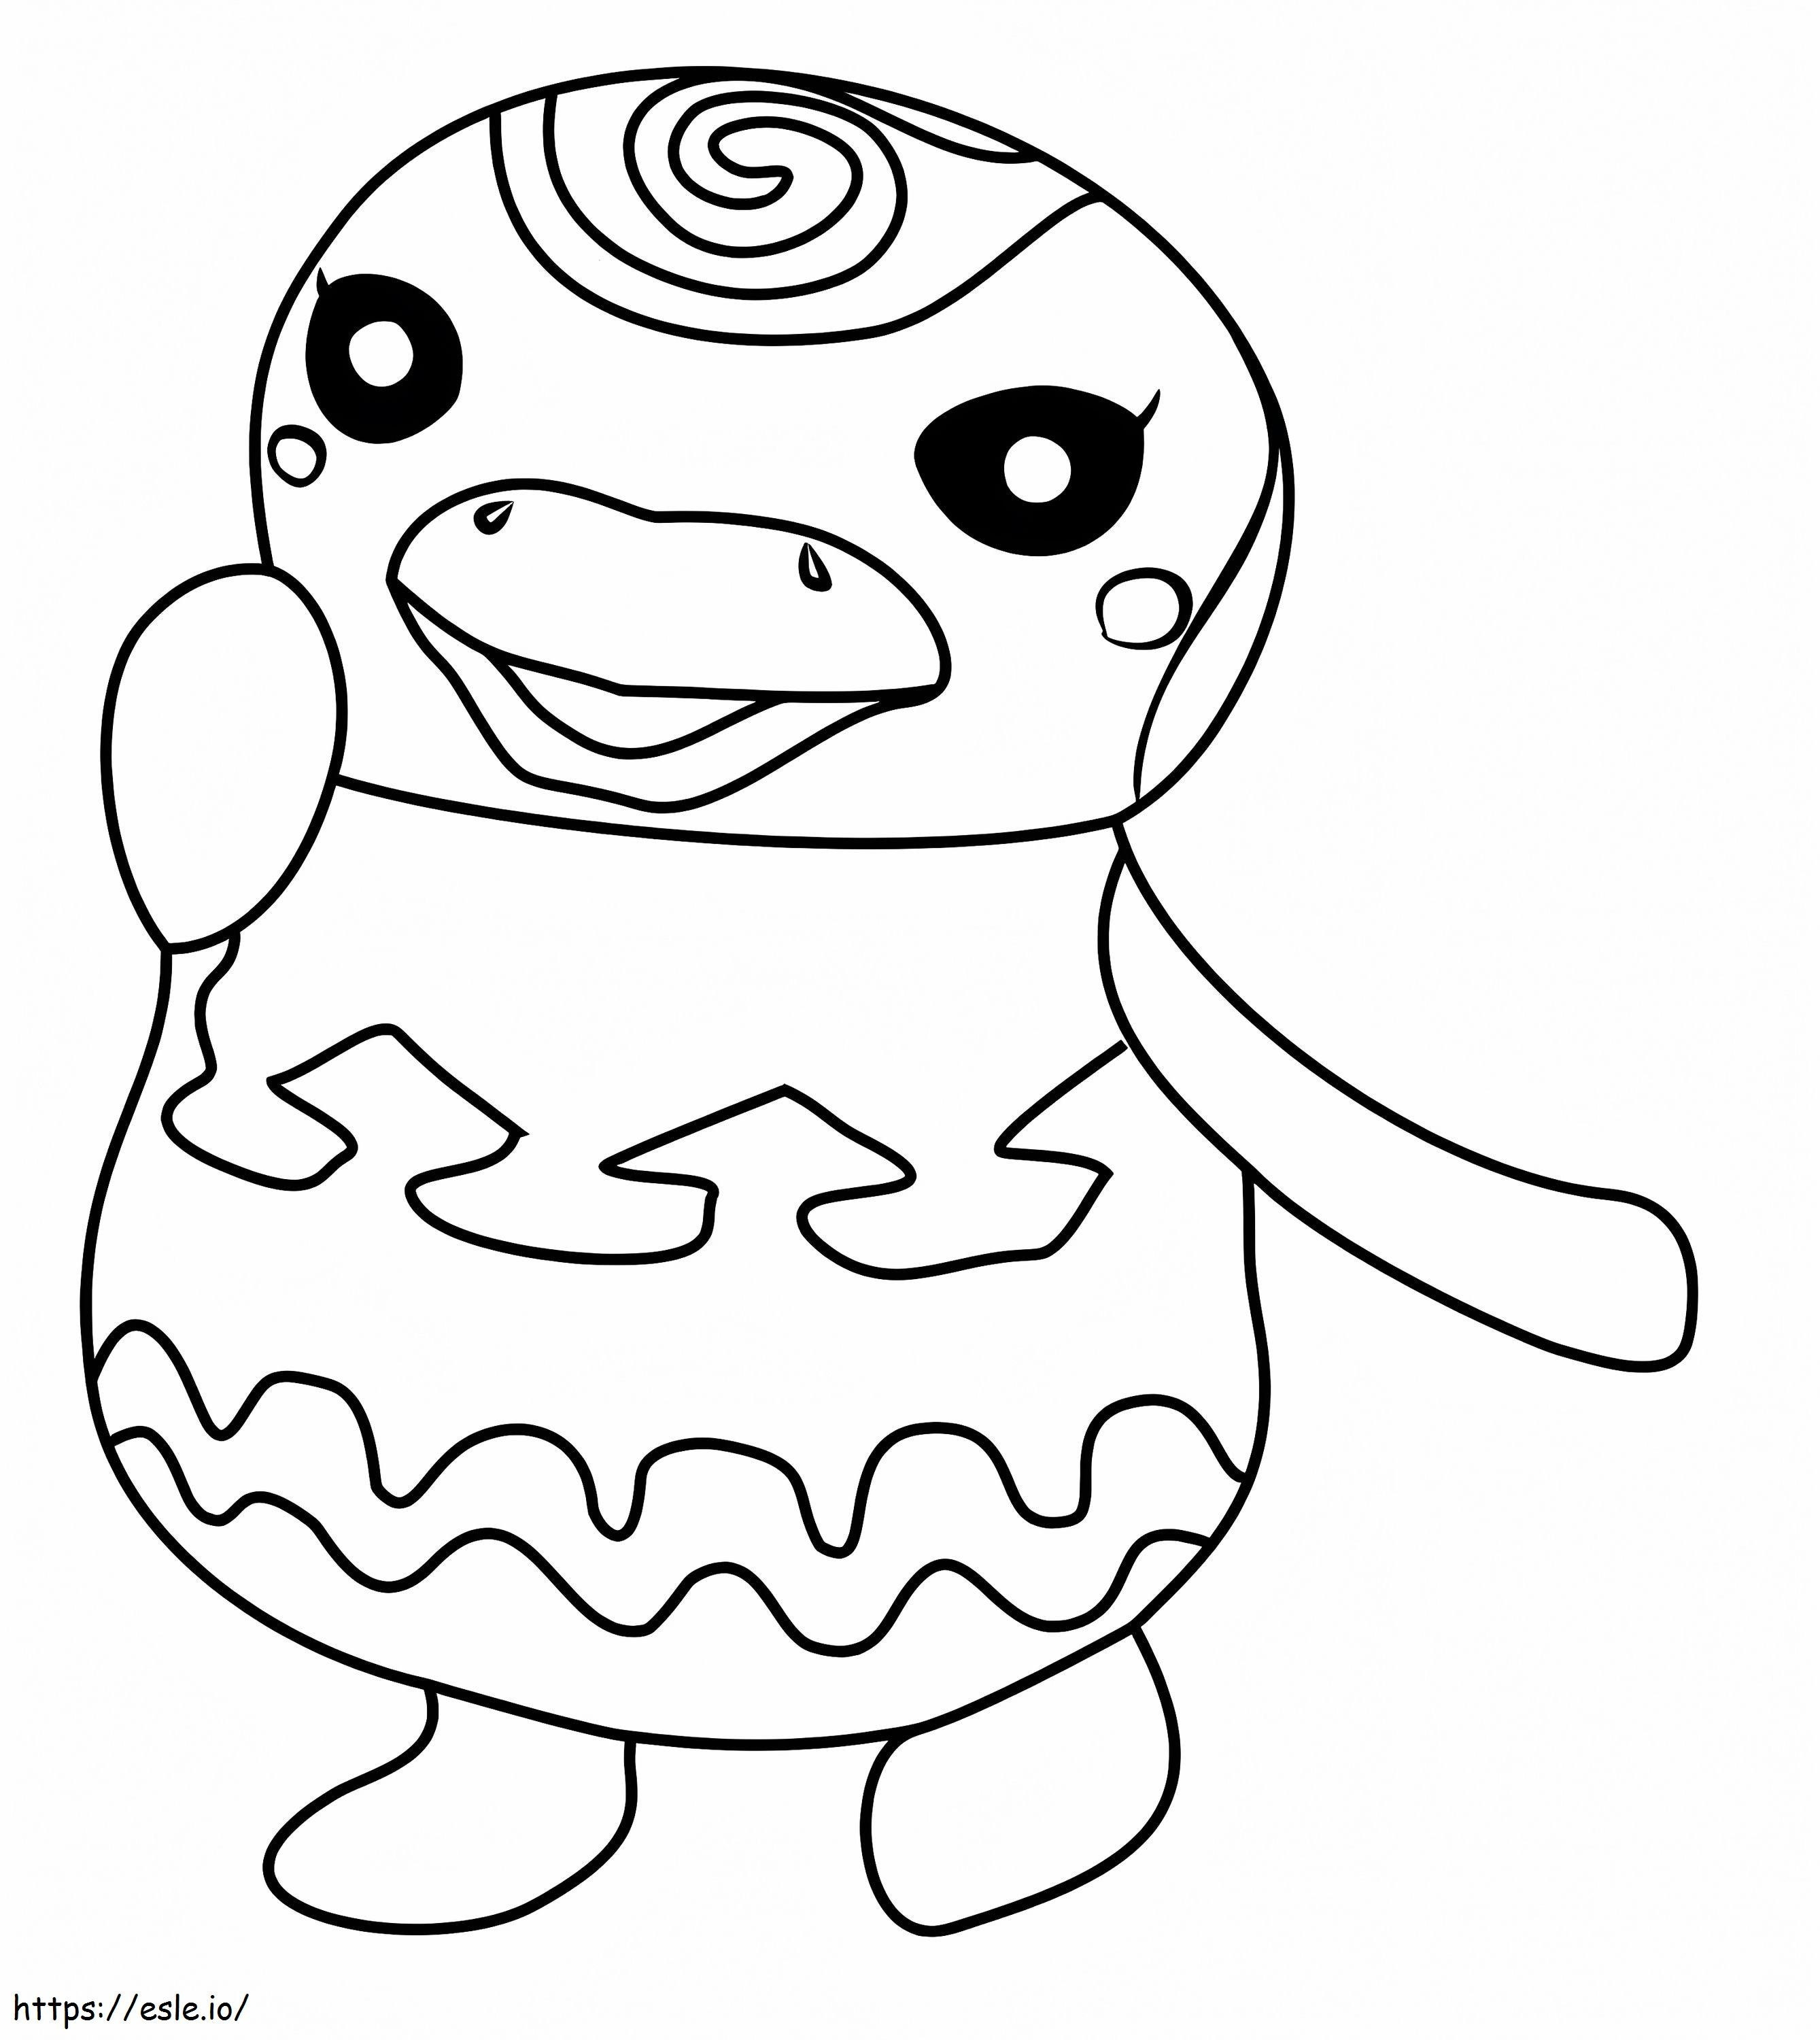 Sprinkle From Animal Crossing coloring page